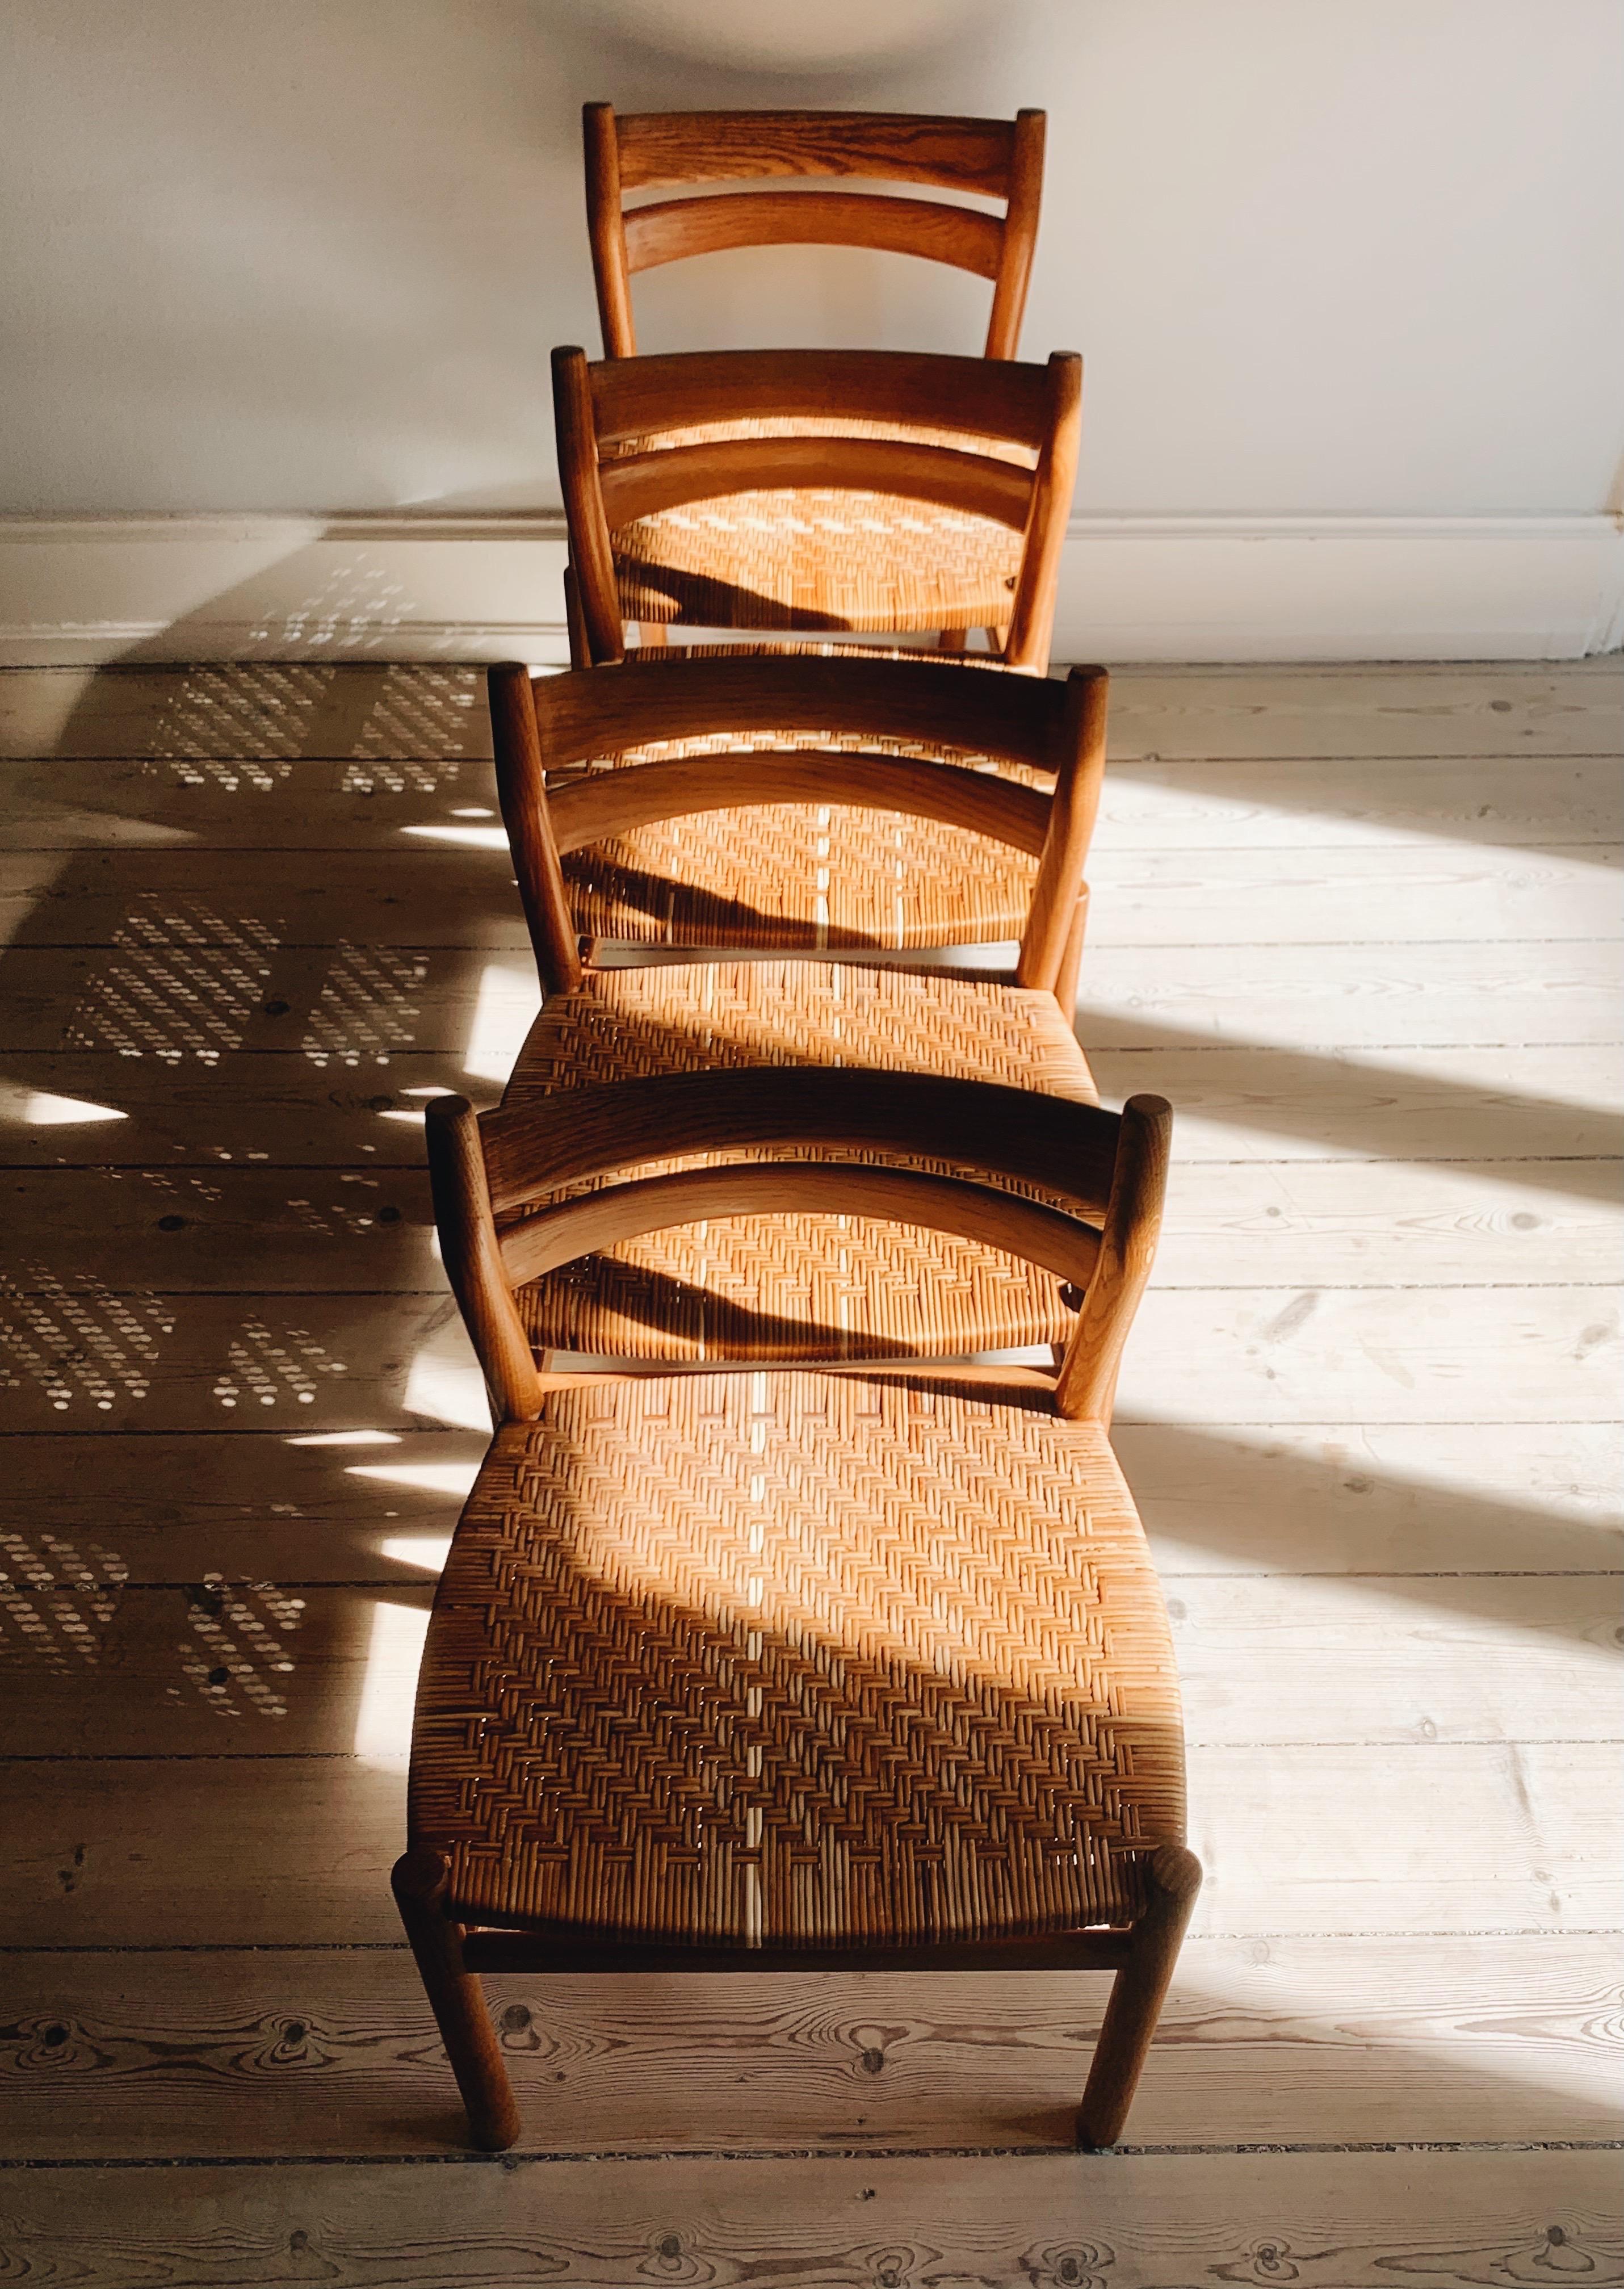 Four BM1 chairs by Børge Mogensen. The chairs are made of solid oak and woven canes. The chairs are produced at C.M. Madsen Fabriker around the 1960’s. All four chairs have original cane seats, which has been carefully restored by Denmark's most